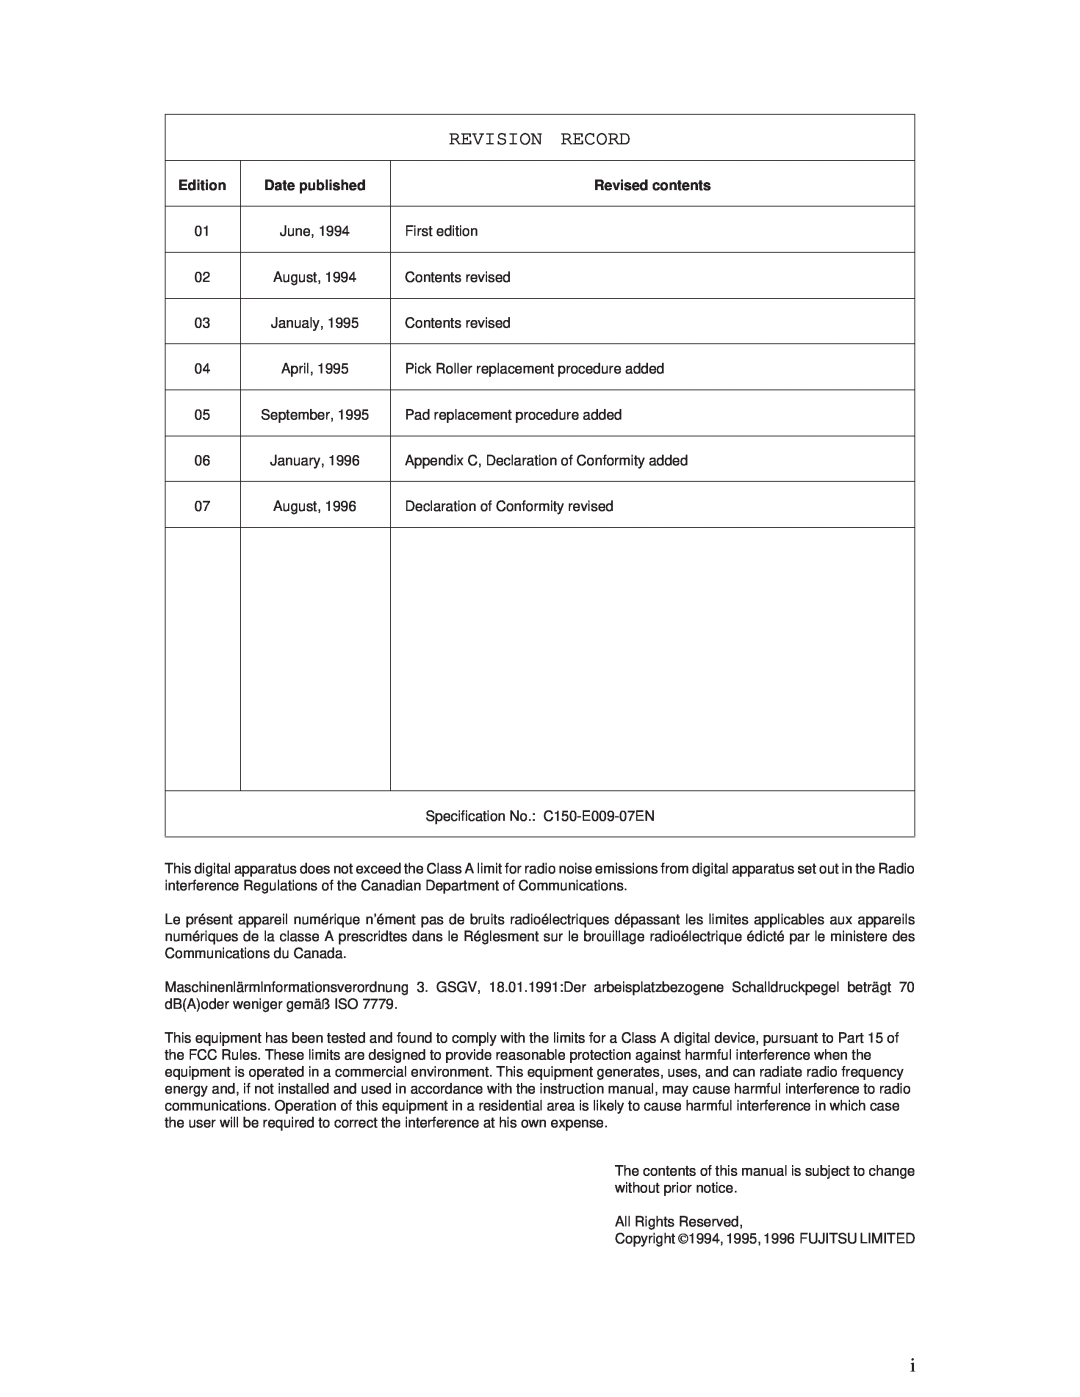 Fujitsu M3096EX, M3096GX manual Revision Record, Edition, Date published, Revised contents 